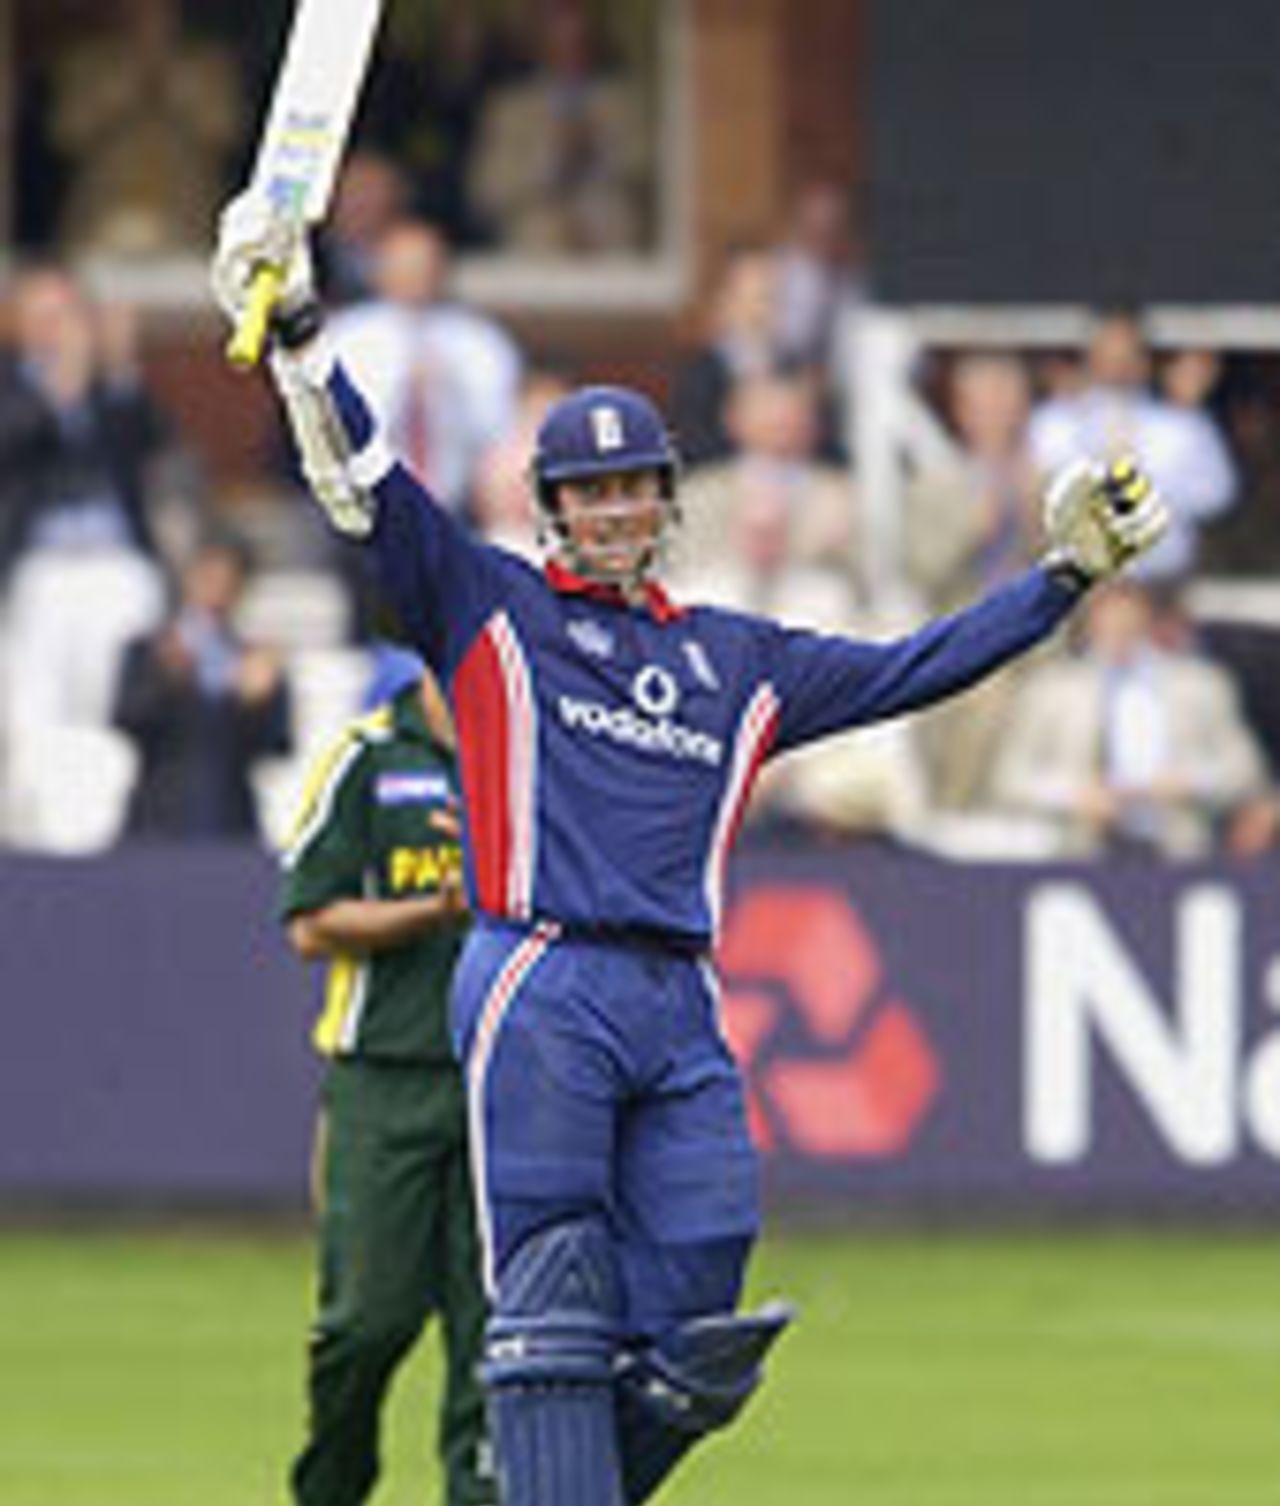 Marcus Trescothick celebrates his century in the third ODI of the NatWest Challenge against Pakistan